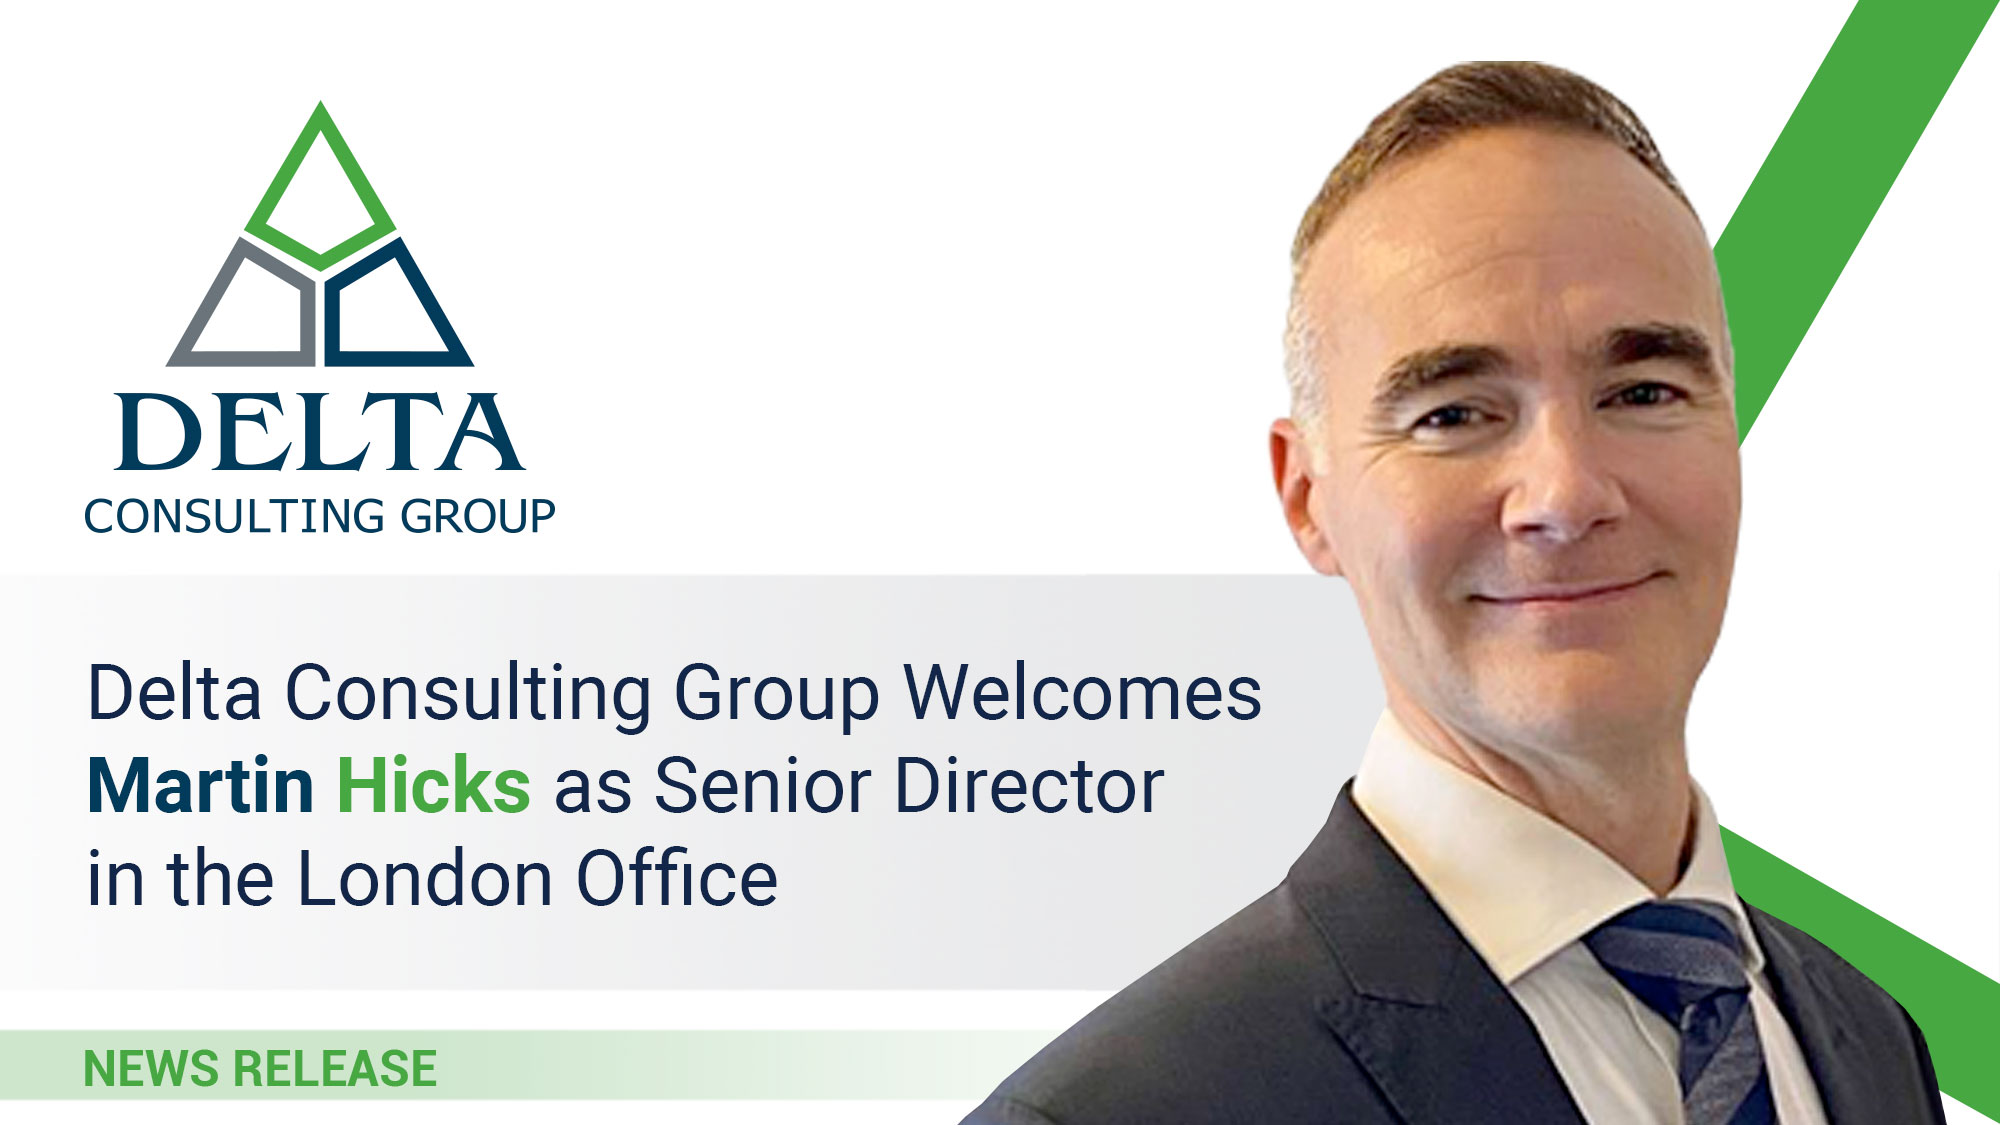 Delta Consulting Group Welcomes Martin Hicks as Senior Director in the London Office